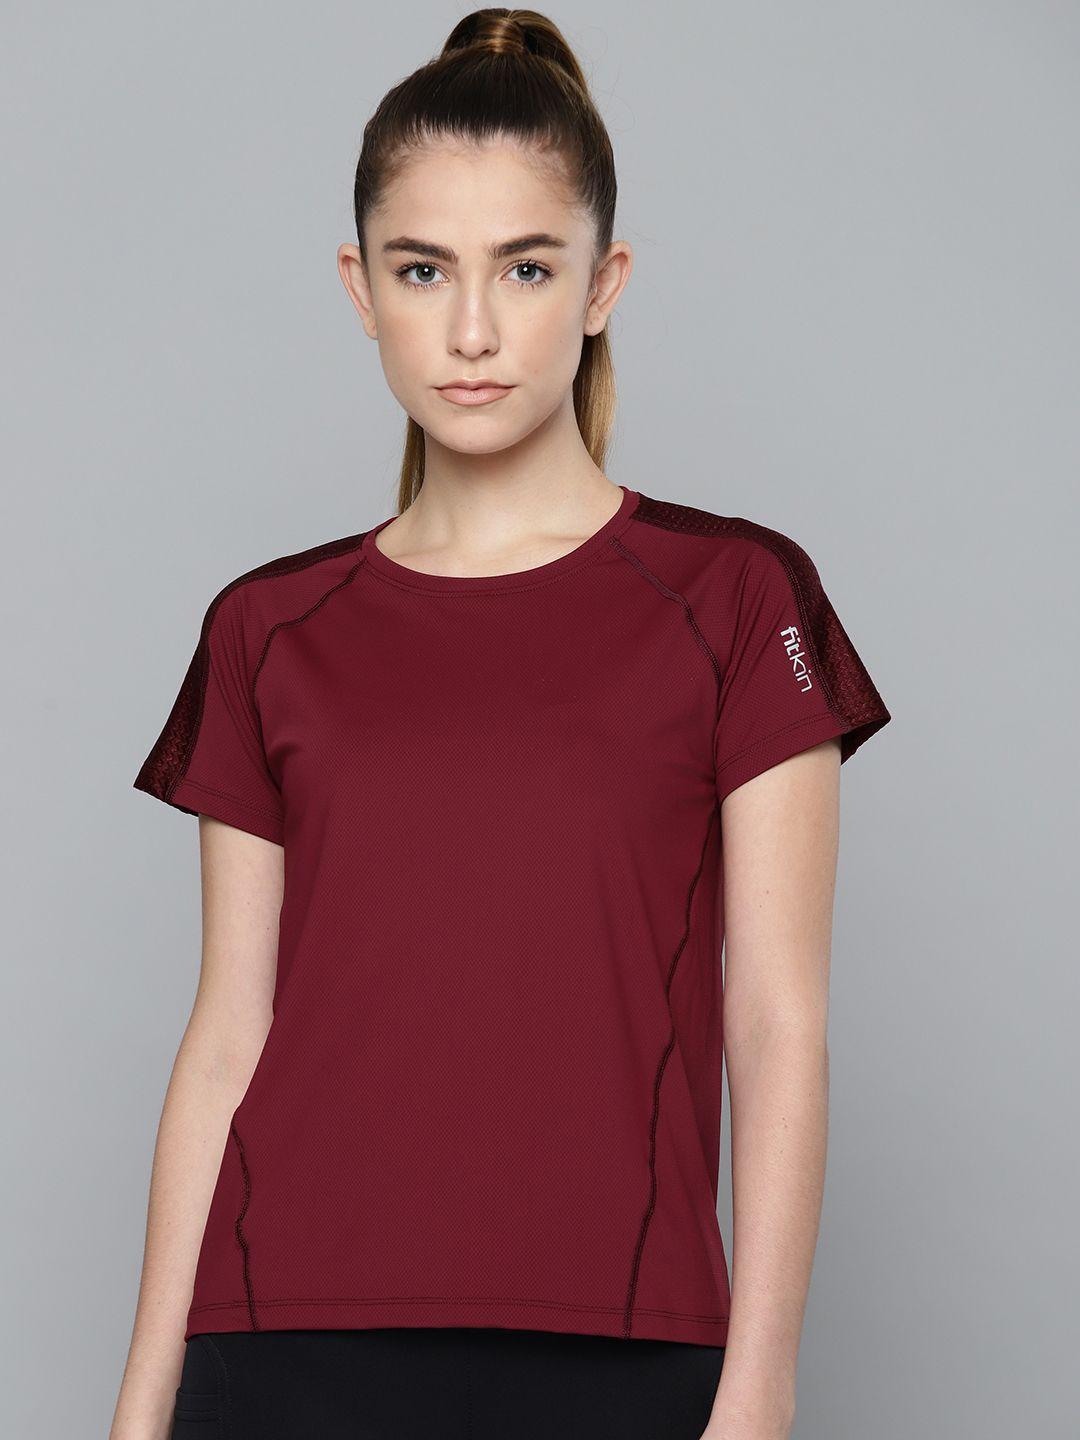 fitkin women wine coloured training or gym t-shirt with design sleeves